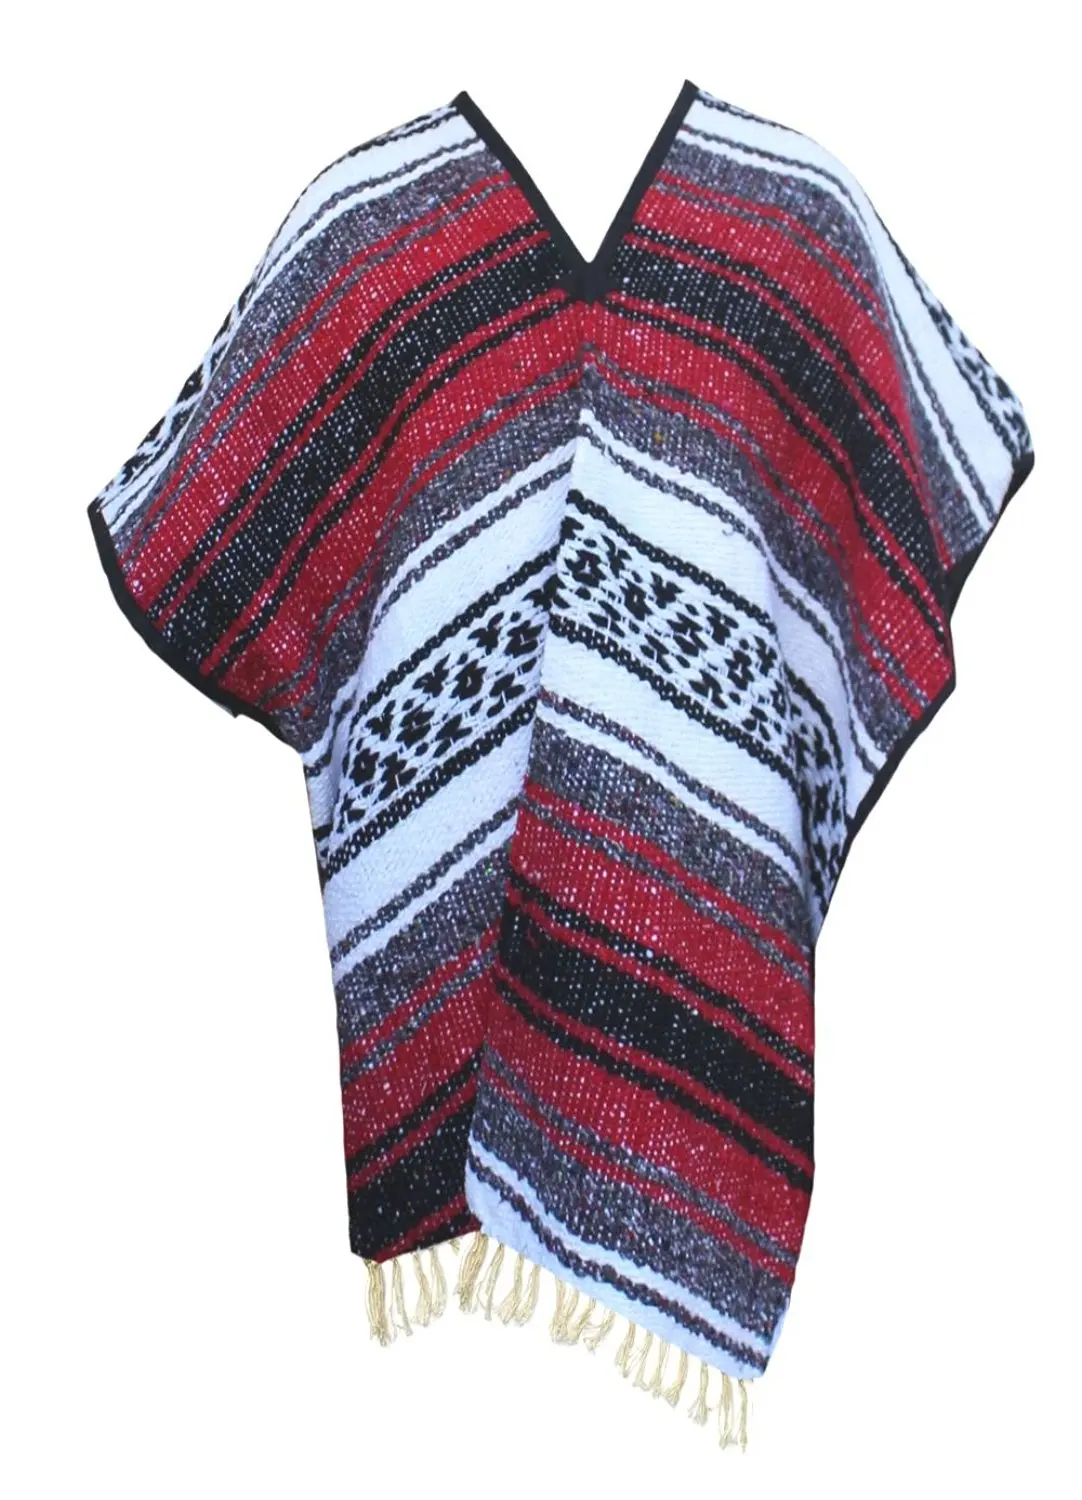 Del Mex Youth Child Classic Mexican Blanket Poncho Pancho Costume Blue